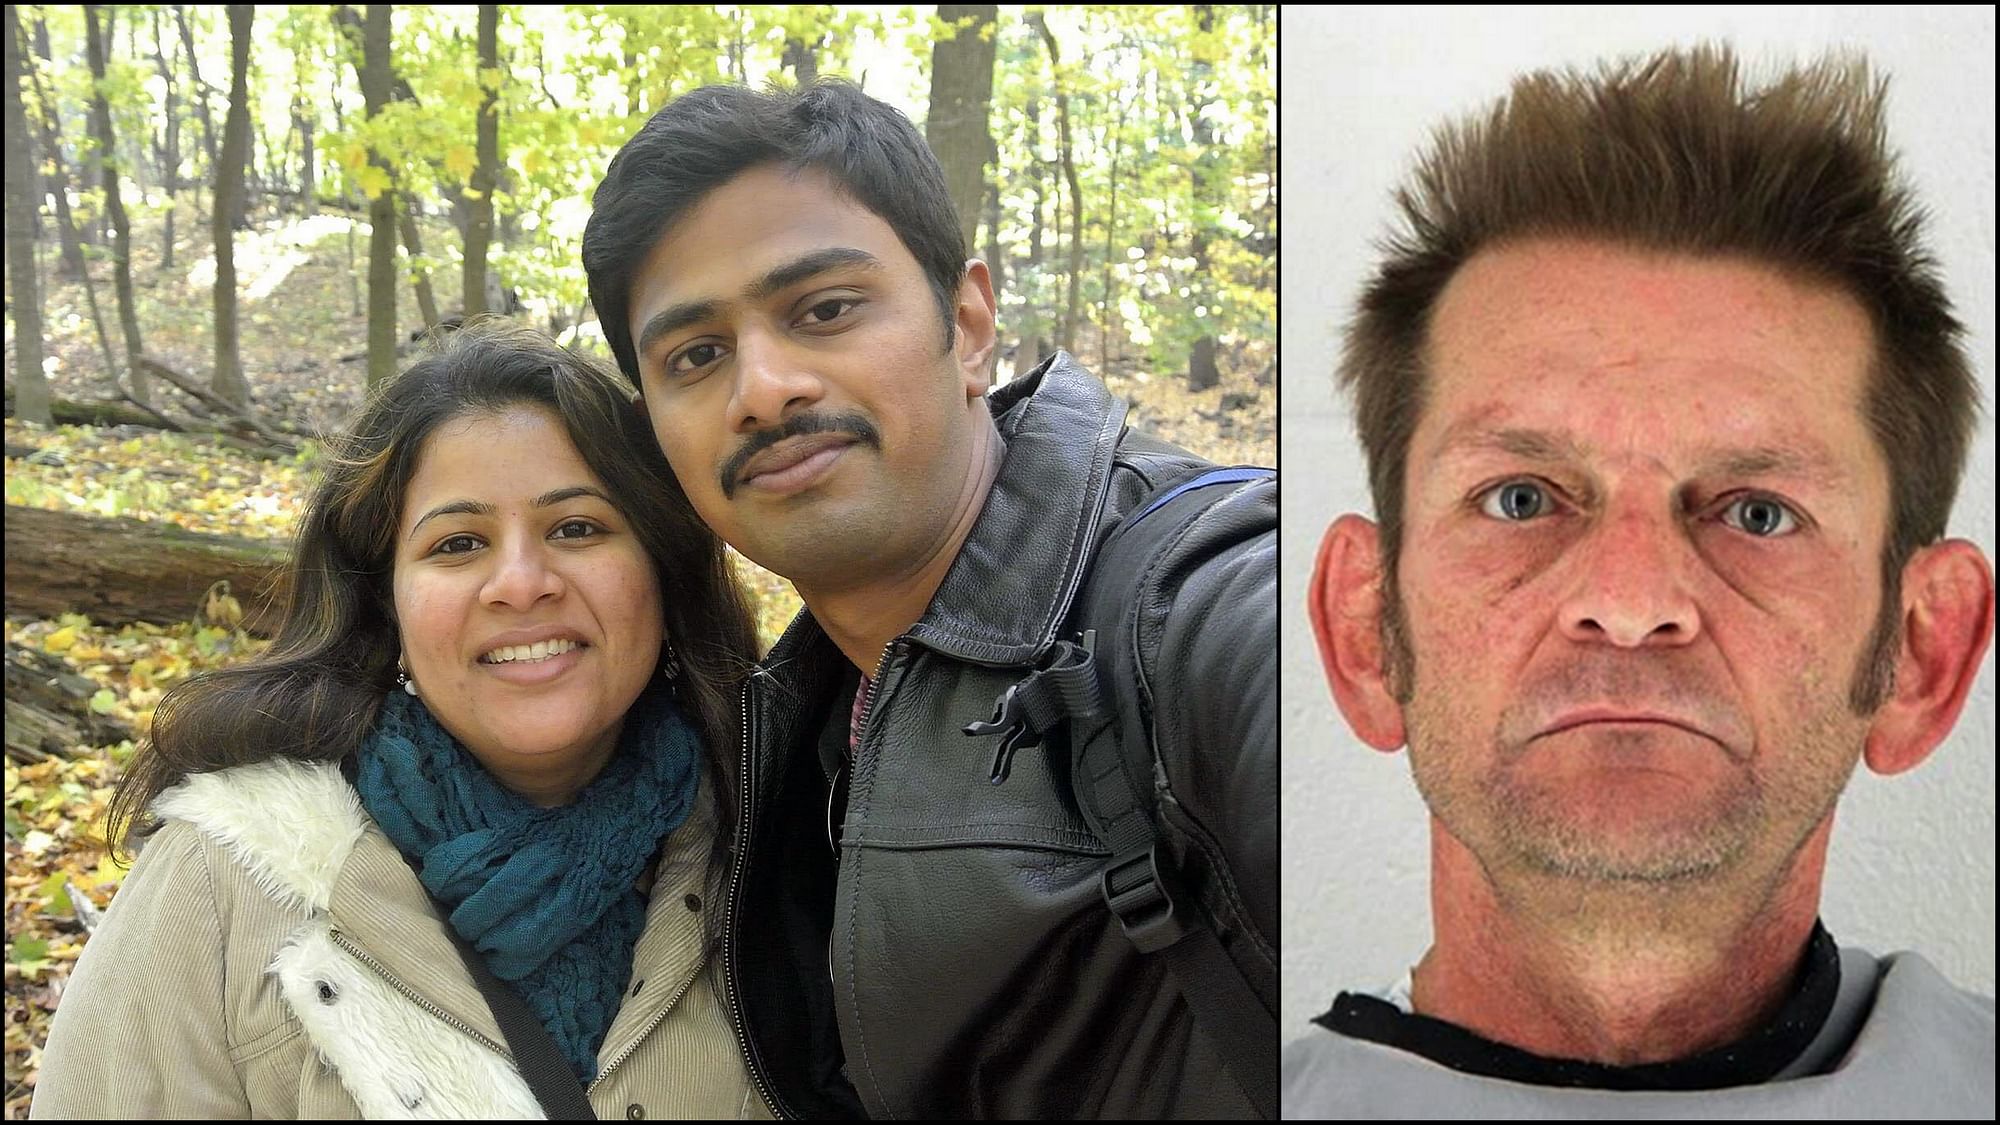 Srinivas Kuchibhotla, right, poses for photo with his wife Sunayana Dumala in Cedar Rapids, Iowa (L). Adam Purinton, who has been charged with murder and attempted murder in the Wednesday night shooting at a crowded bar in the Kansas City suburb of Olathe. (Photo: AP)